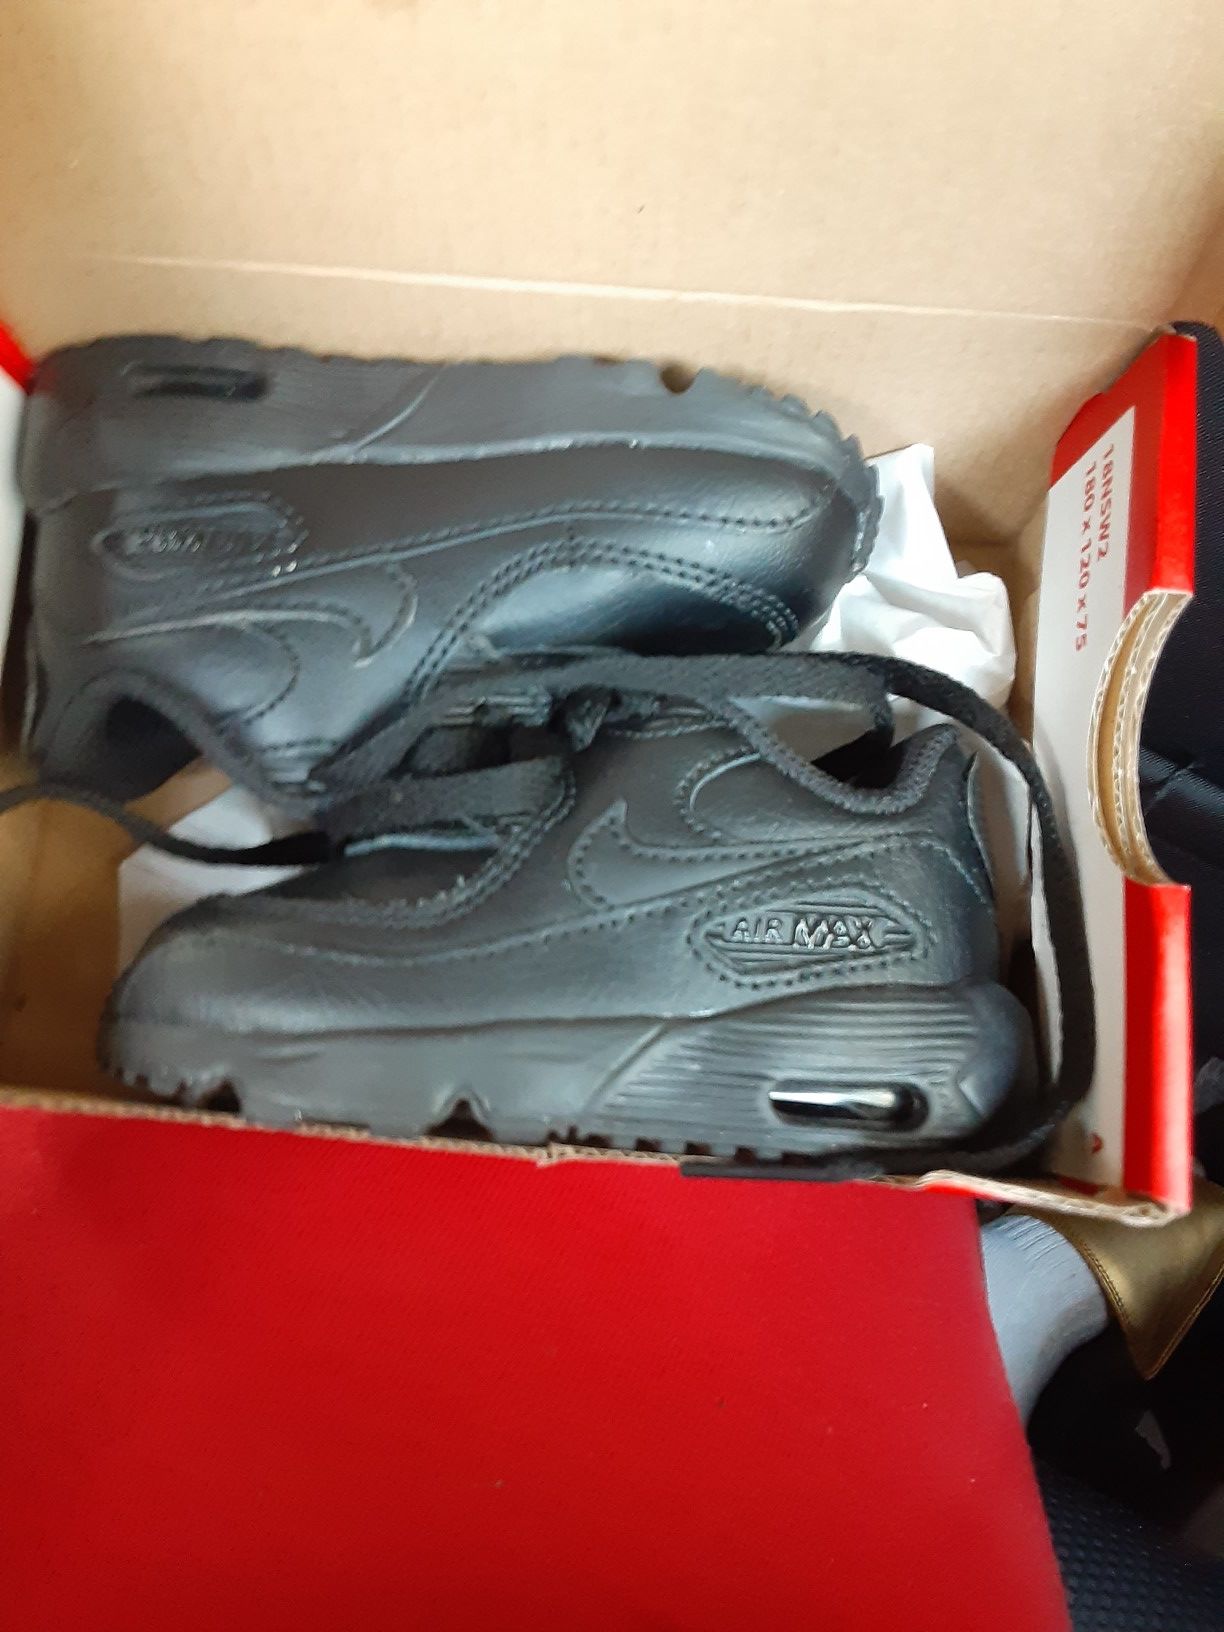 Nike Air Max 90s size 5c for baby/toddler